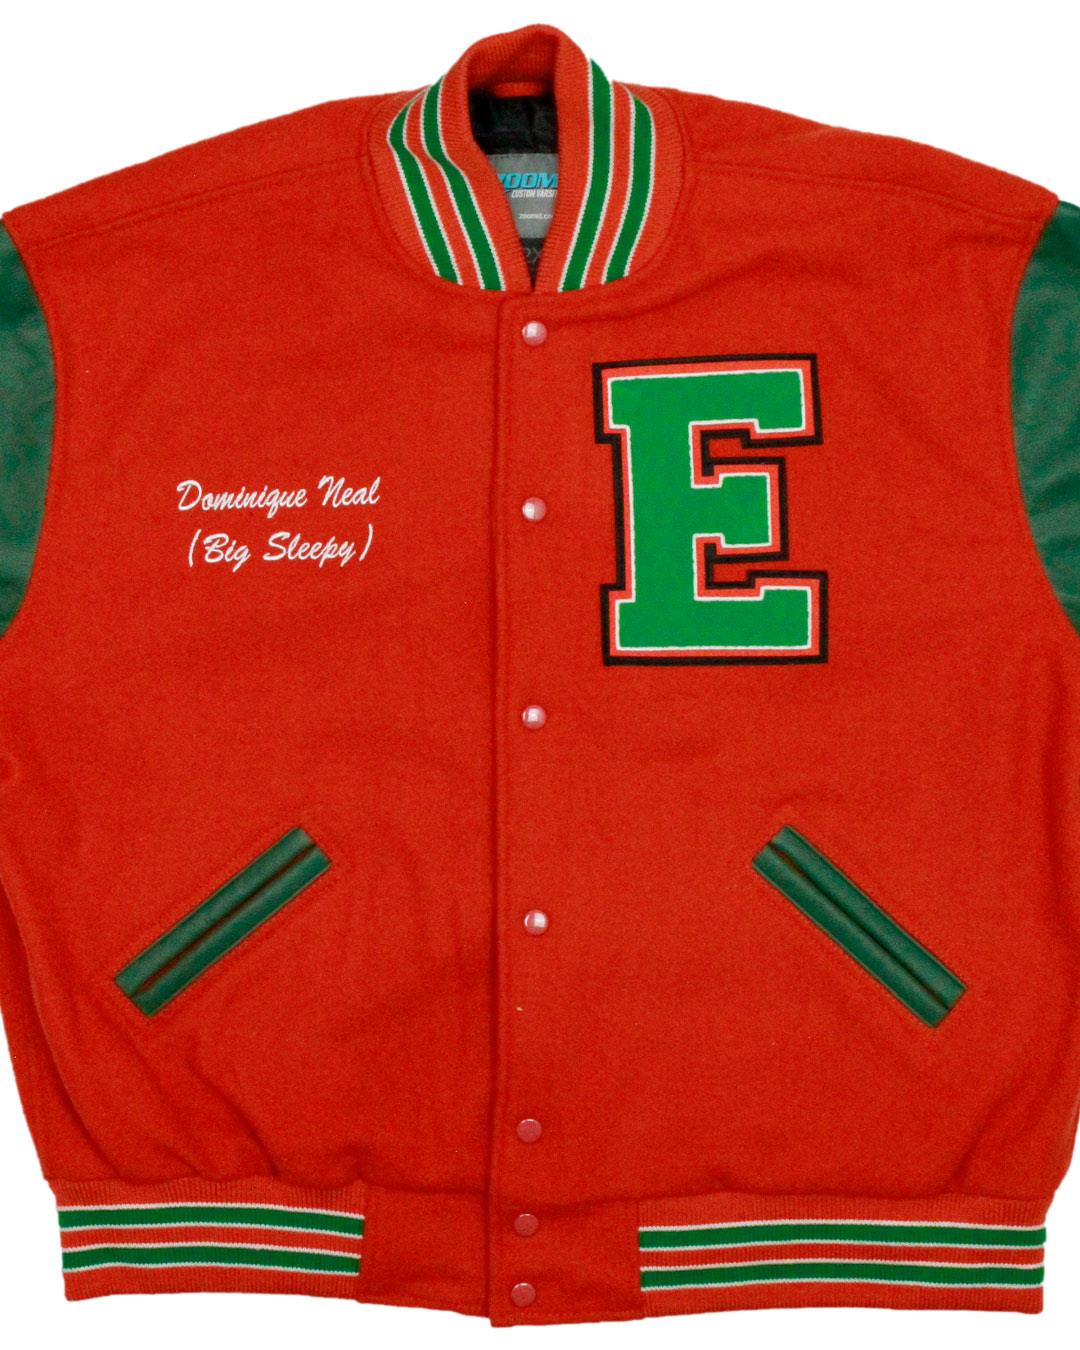 Blanche Ely High School Tigers Letterman jacket, Pompano Beach, FL -  Front